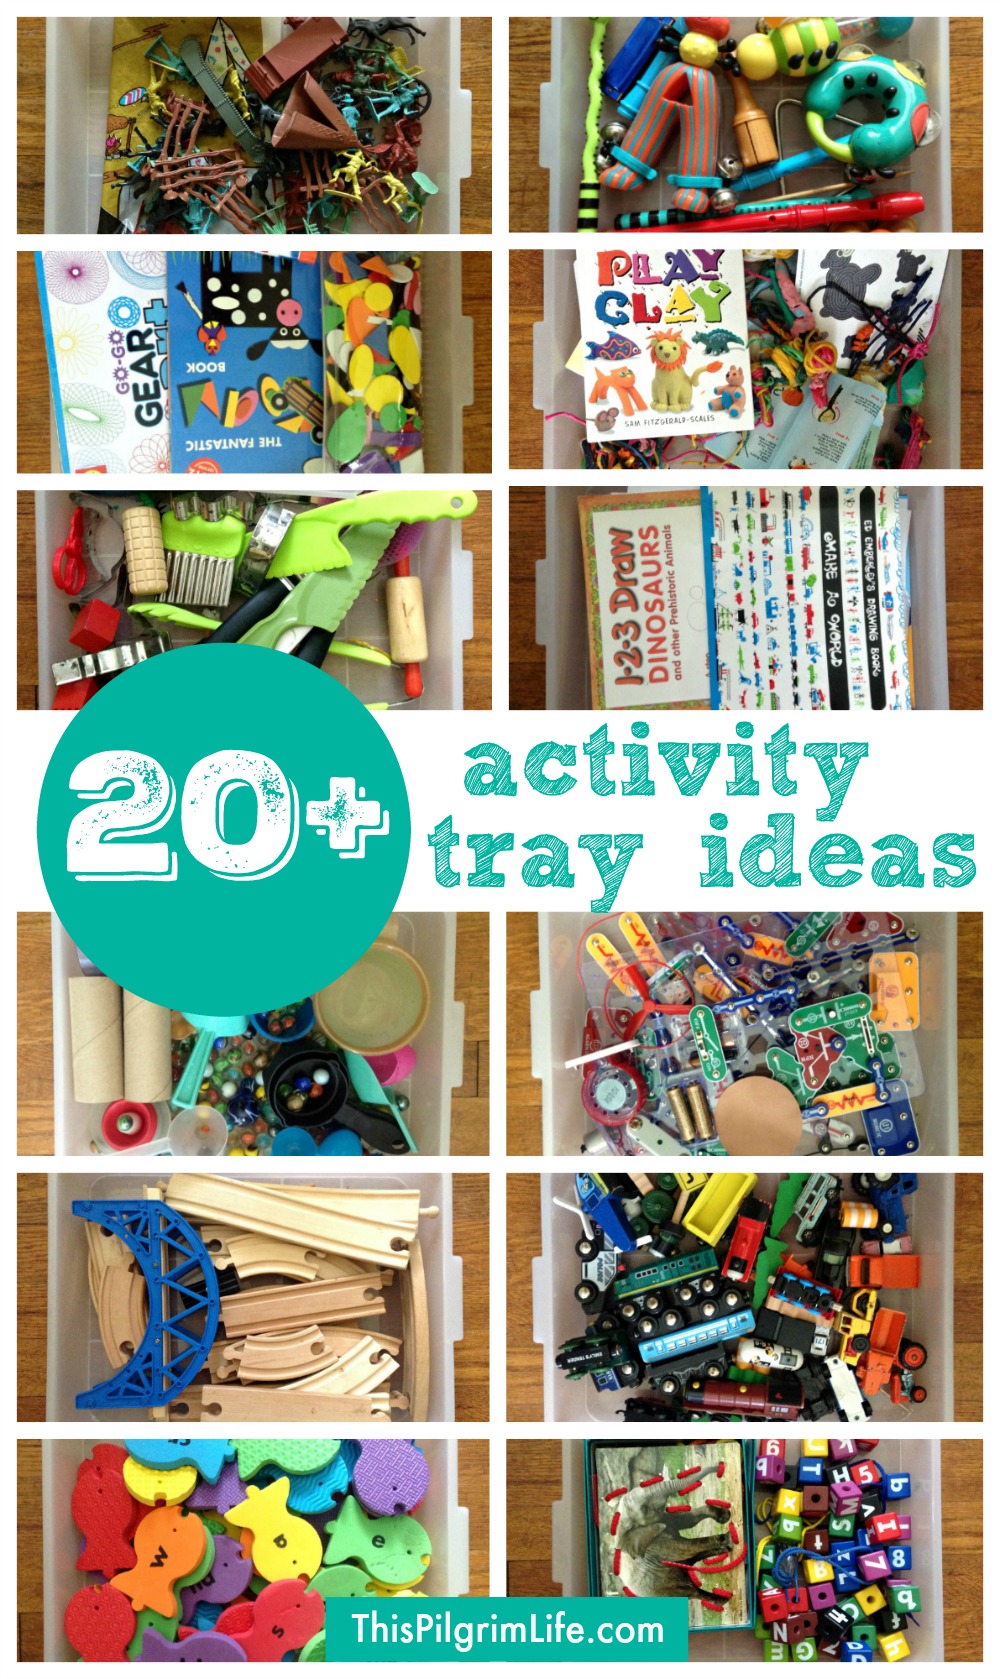 20+ Activity Tray Ideas for Independent, Creative Play